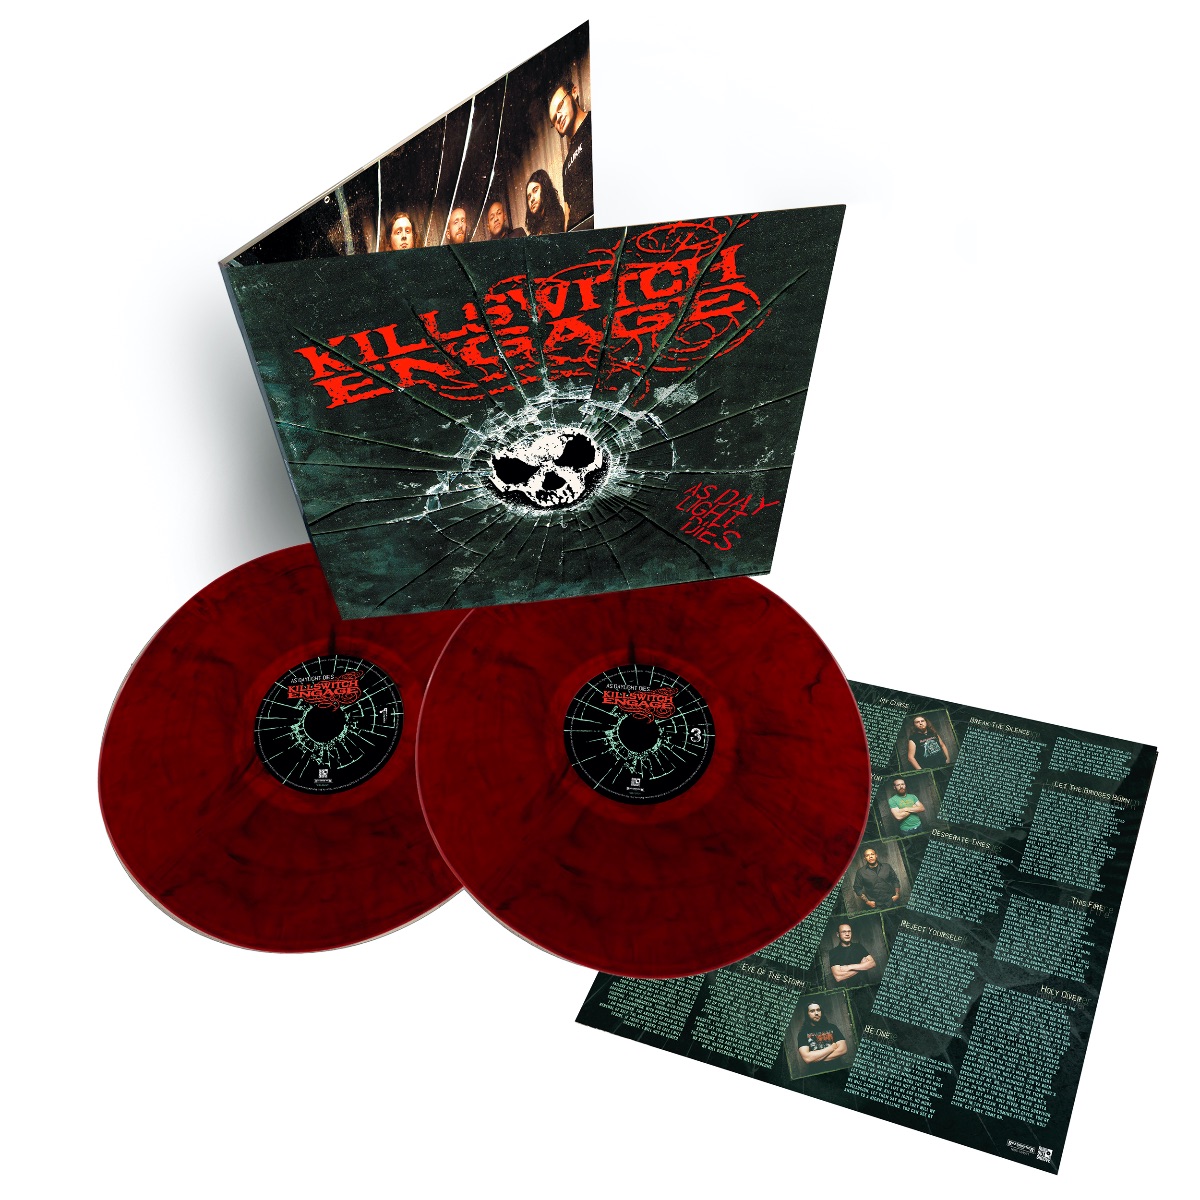 This Killswitch Engage Record Is FINALLY Available On Vinyl